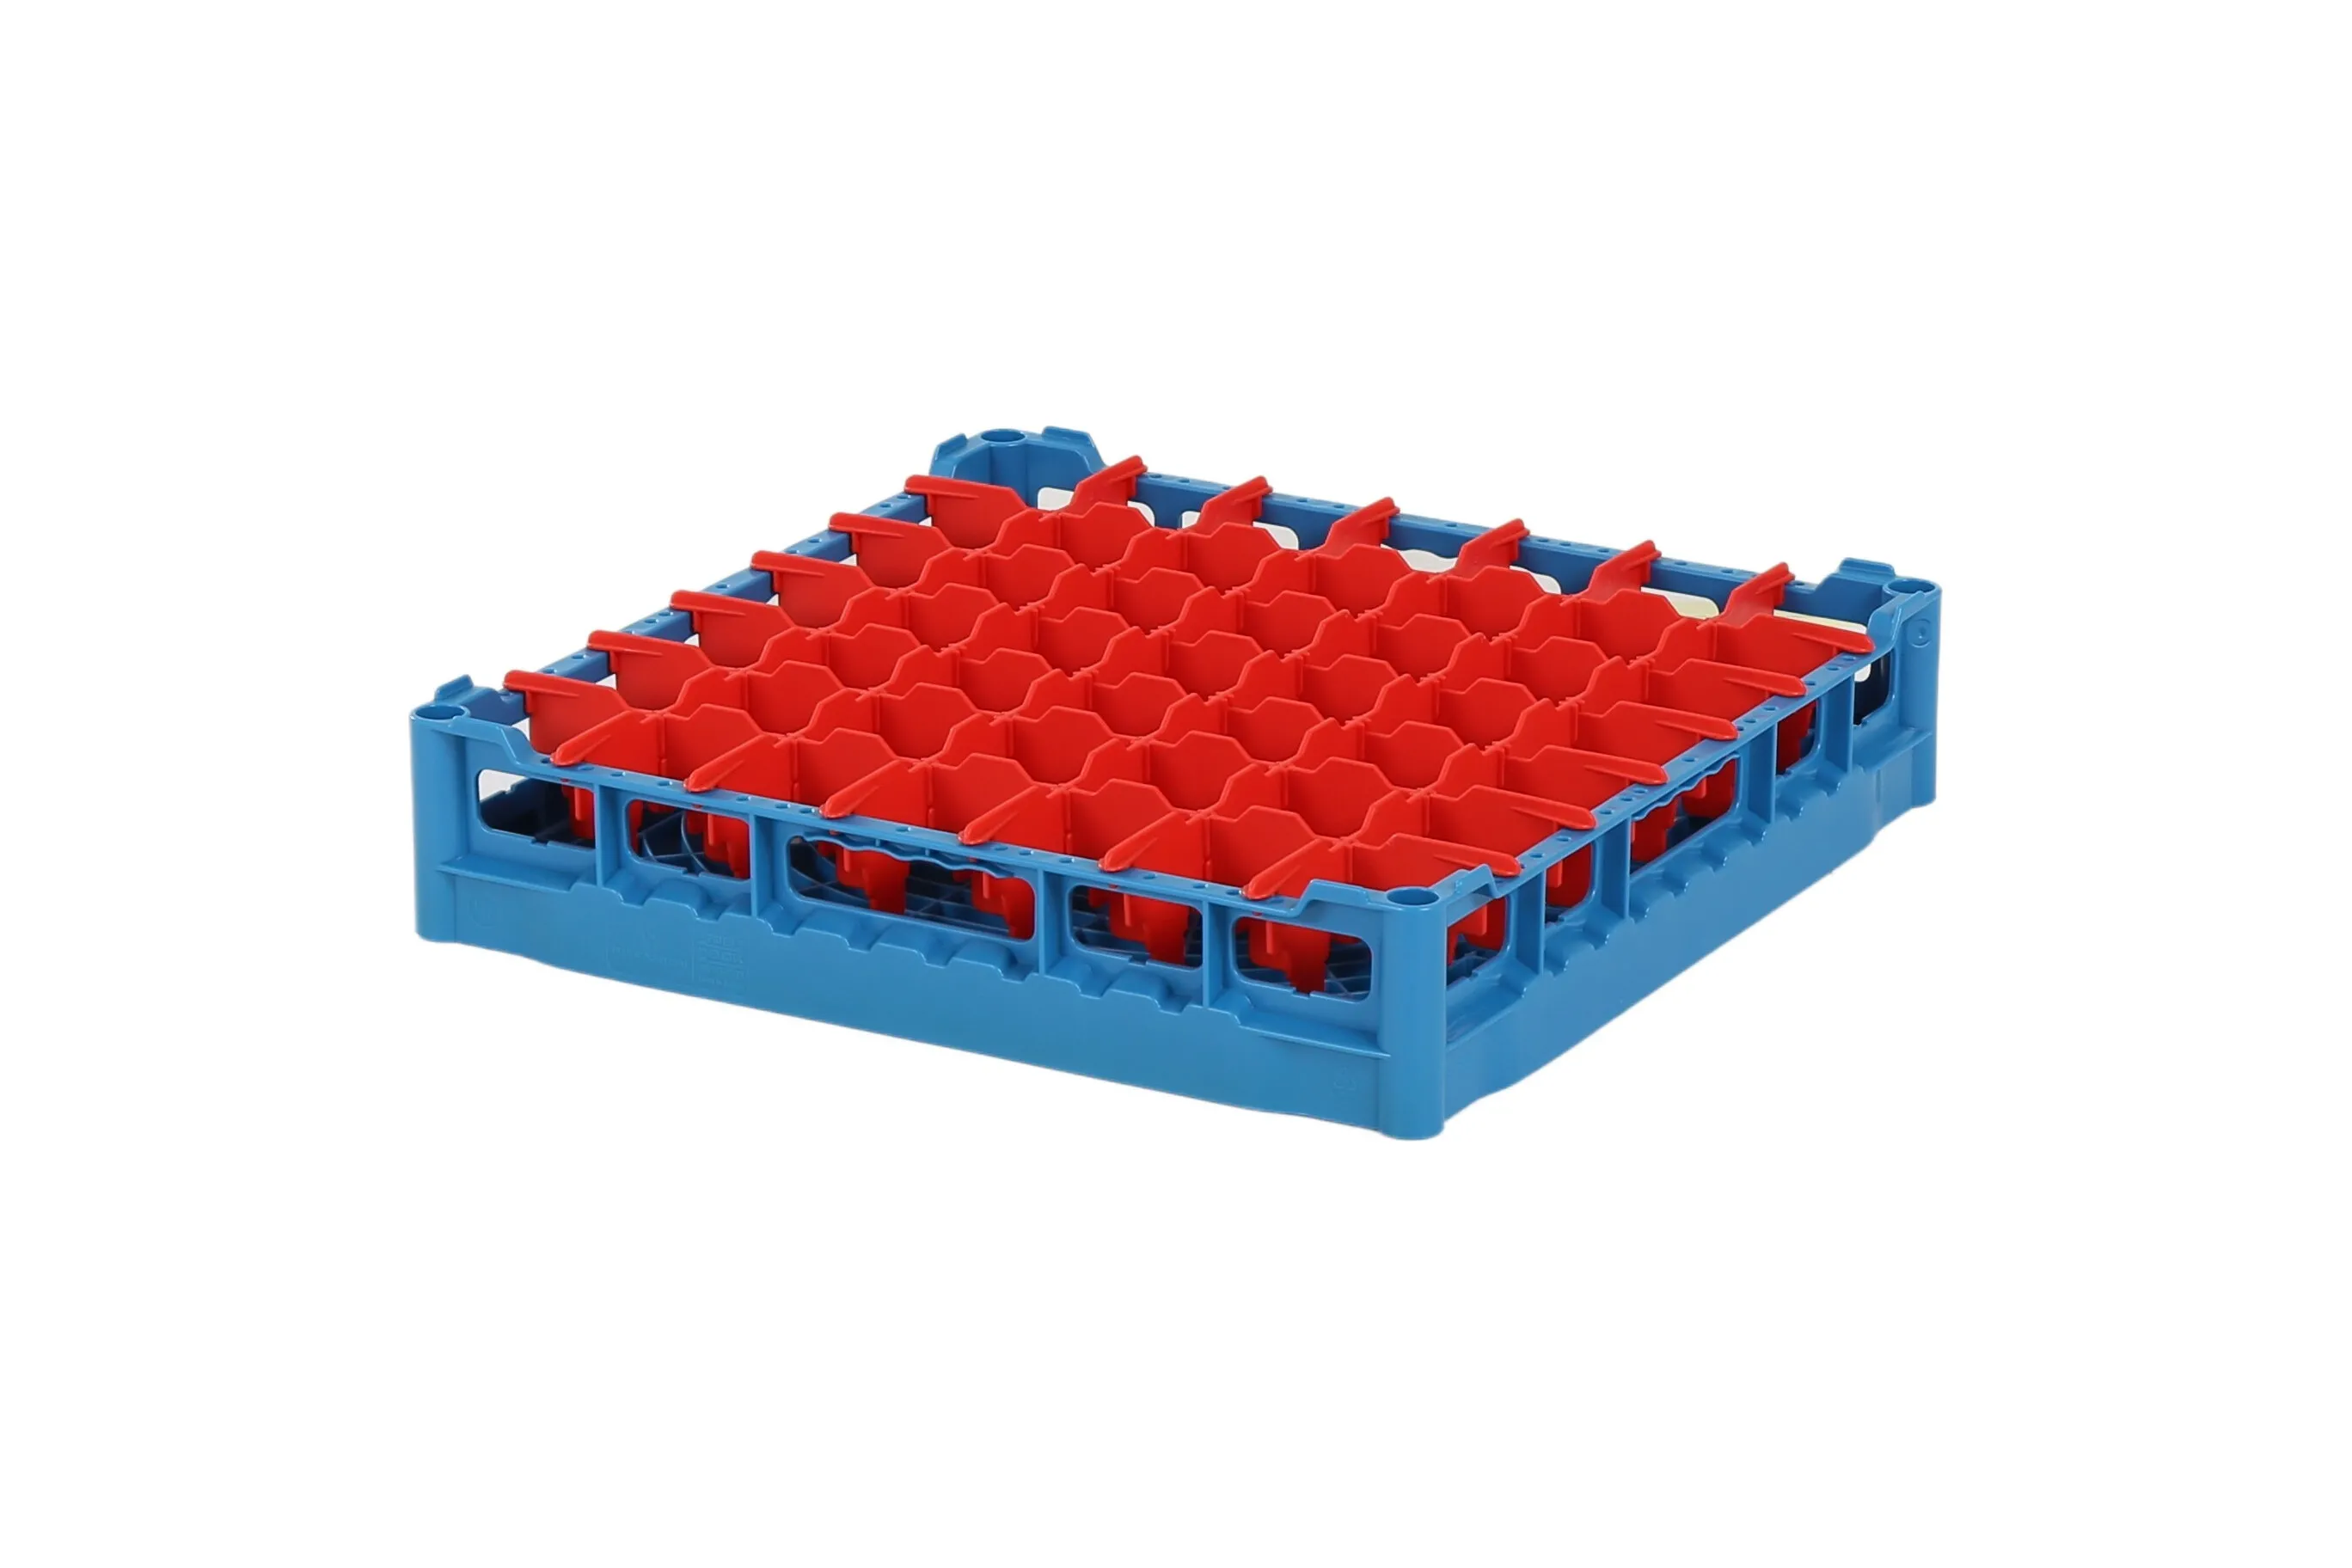 Glass basket 500x500mm blue - maximum glass height 73 mm - with red 7x7 compartment division - maximum glass diameter 63mm